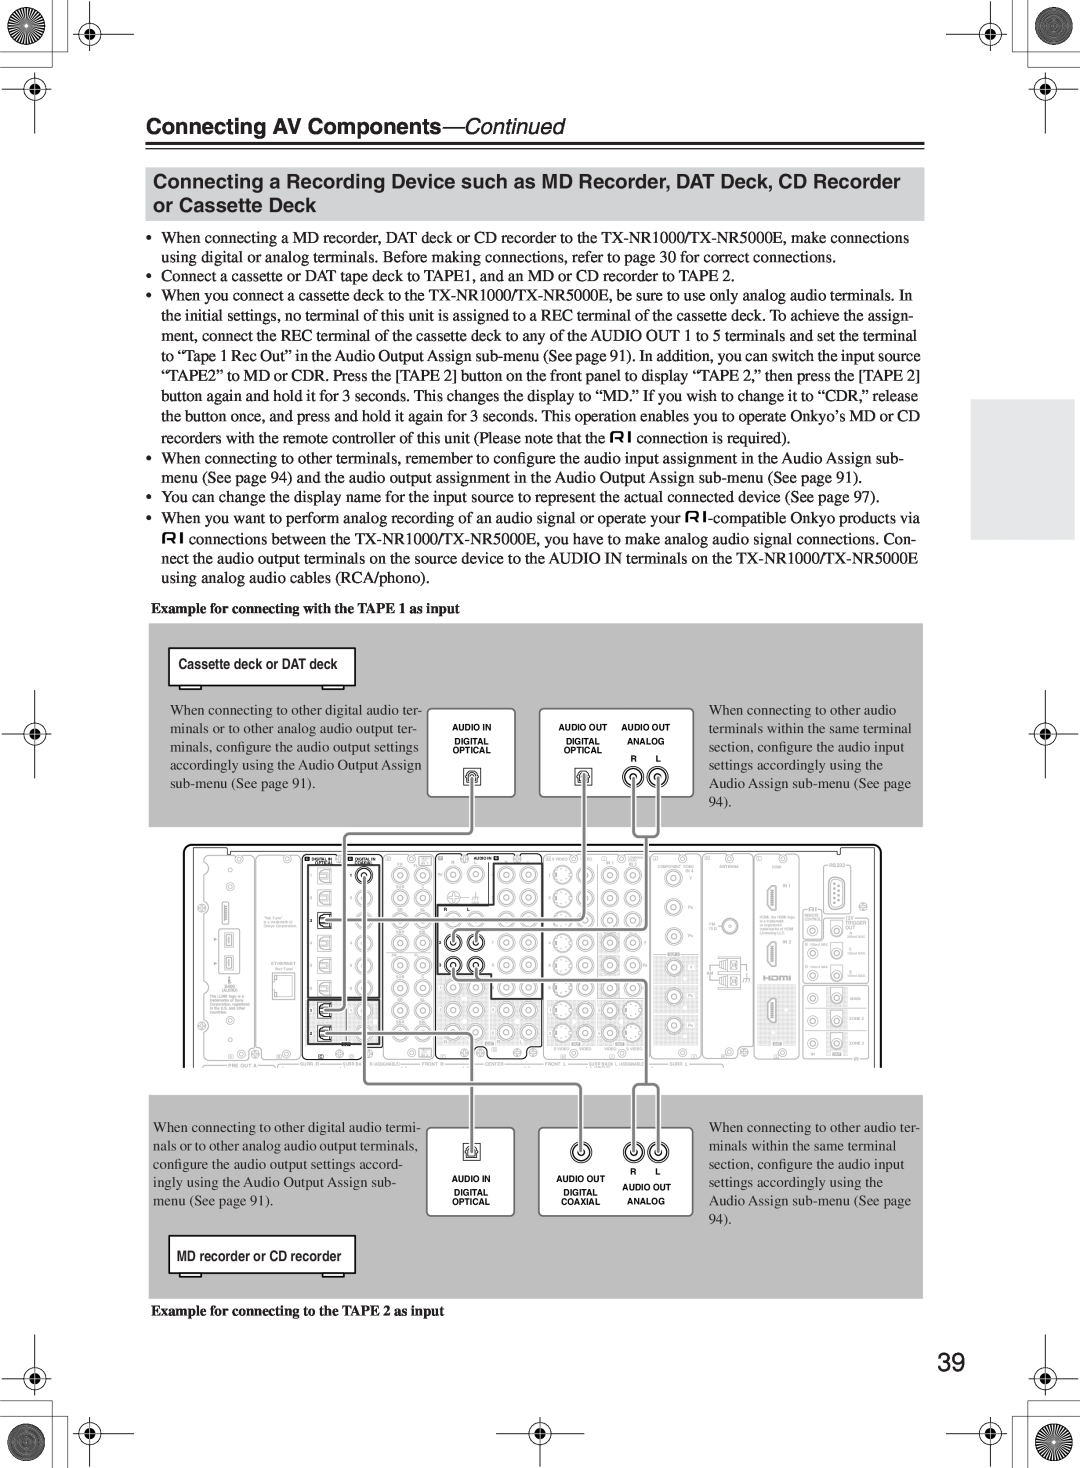 Onkyo TX-NR1000 instruction manual Connecting AV Components—Continued, Example for connecting with the TAPE 1 as input 